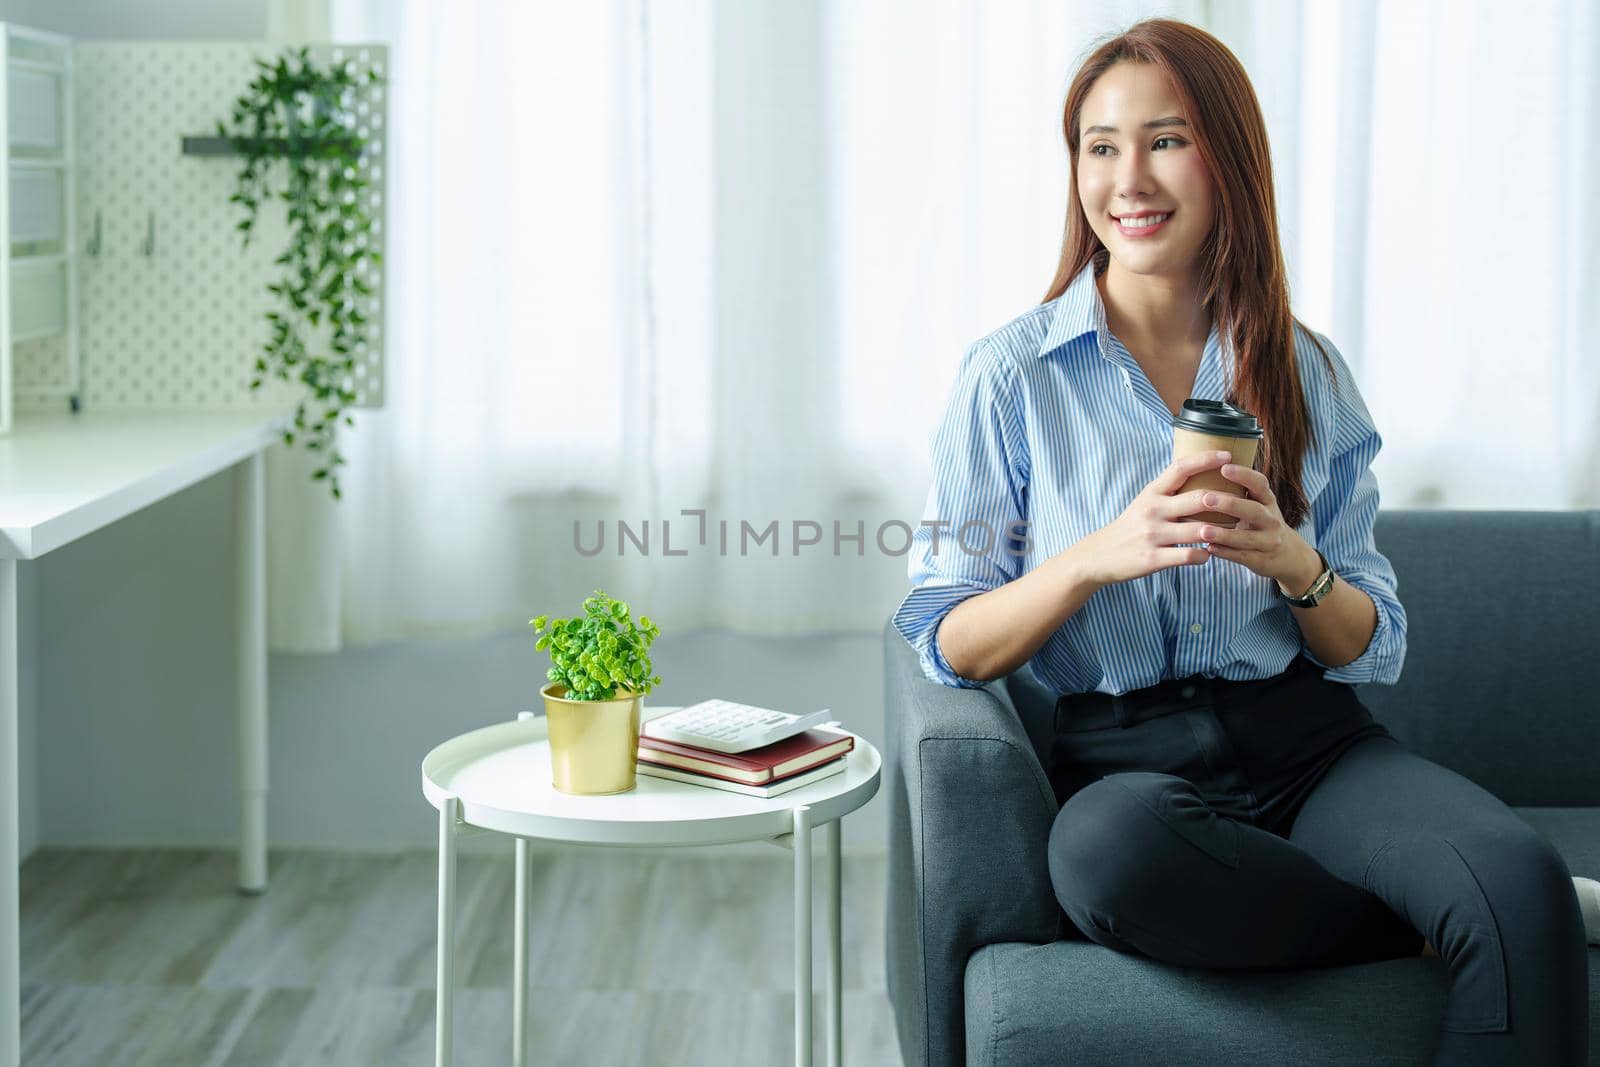 Entrepreneurs, Business Owners, Accountants, Portrait of a Small Business Startup Asians hold happy smiling faces while drinking coffee while taking a break from work